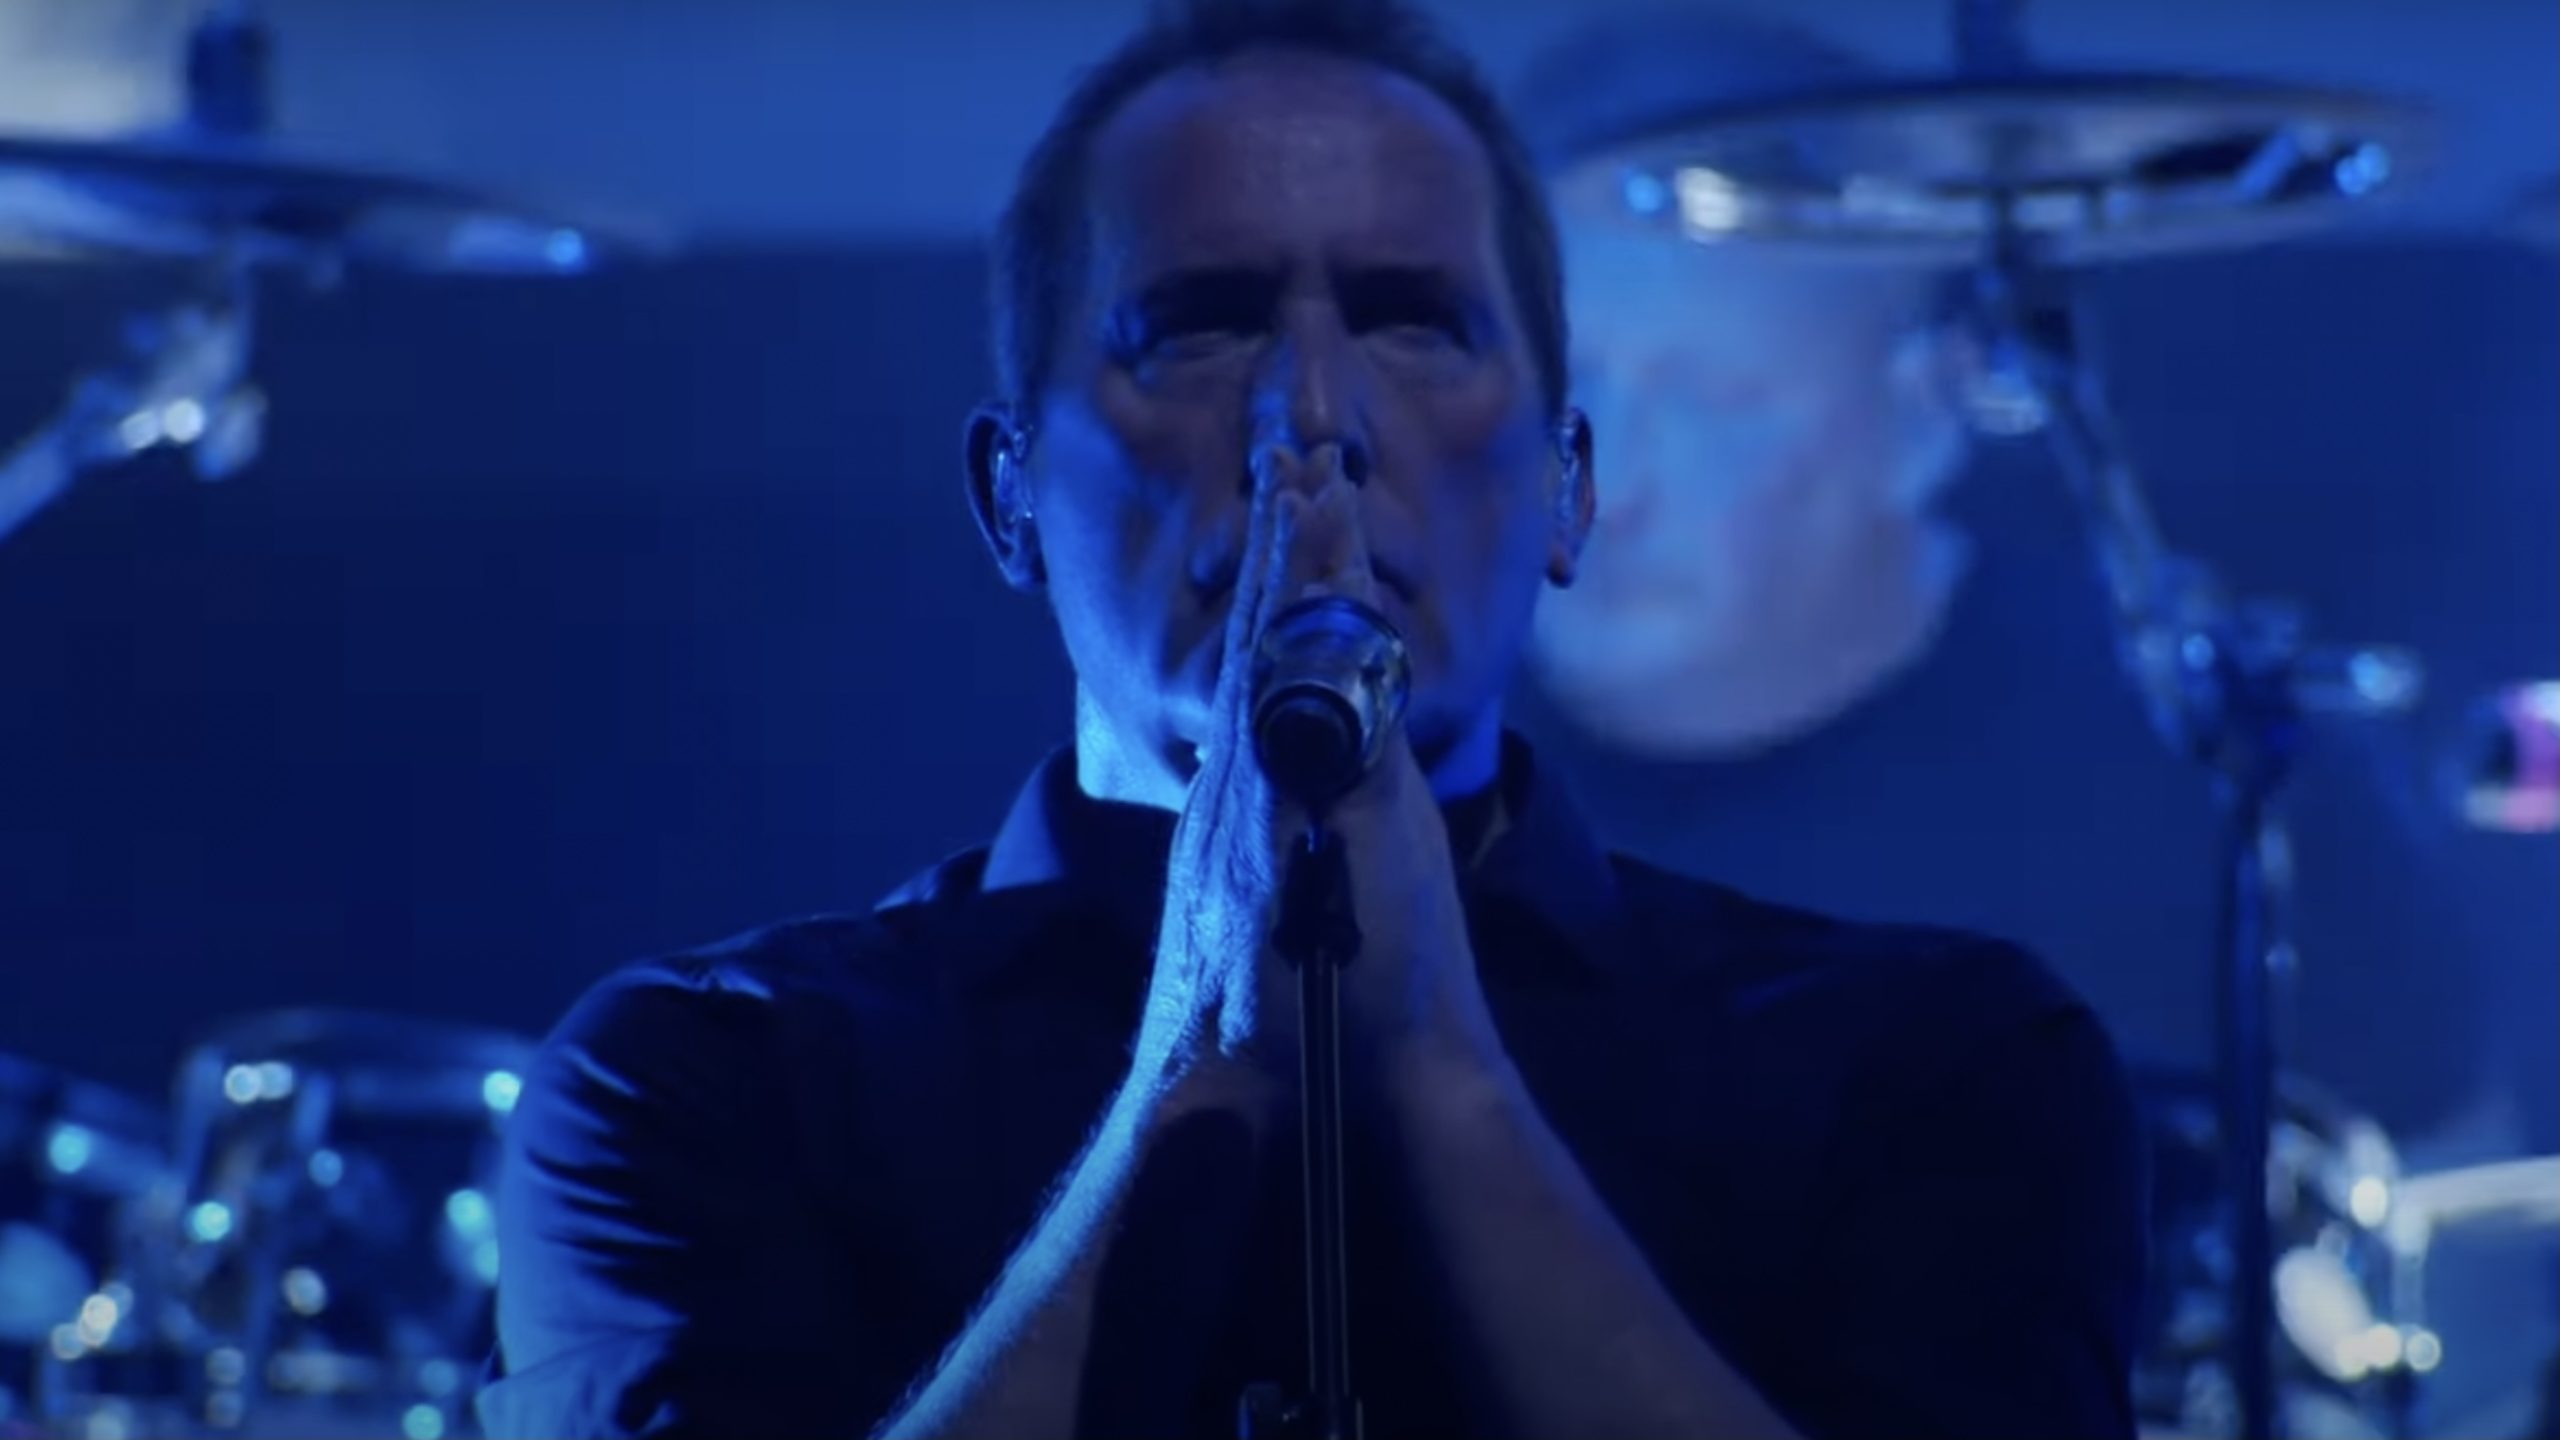 Watch OMD share ‘Sealand’ performance from ‘You Me & OMD’ livestream